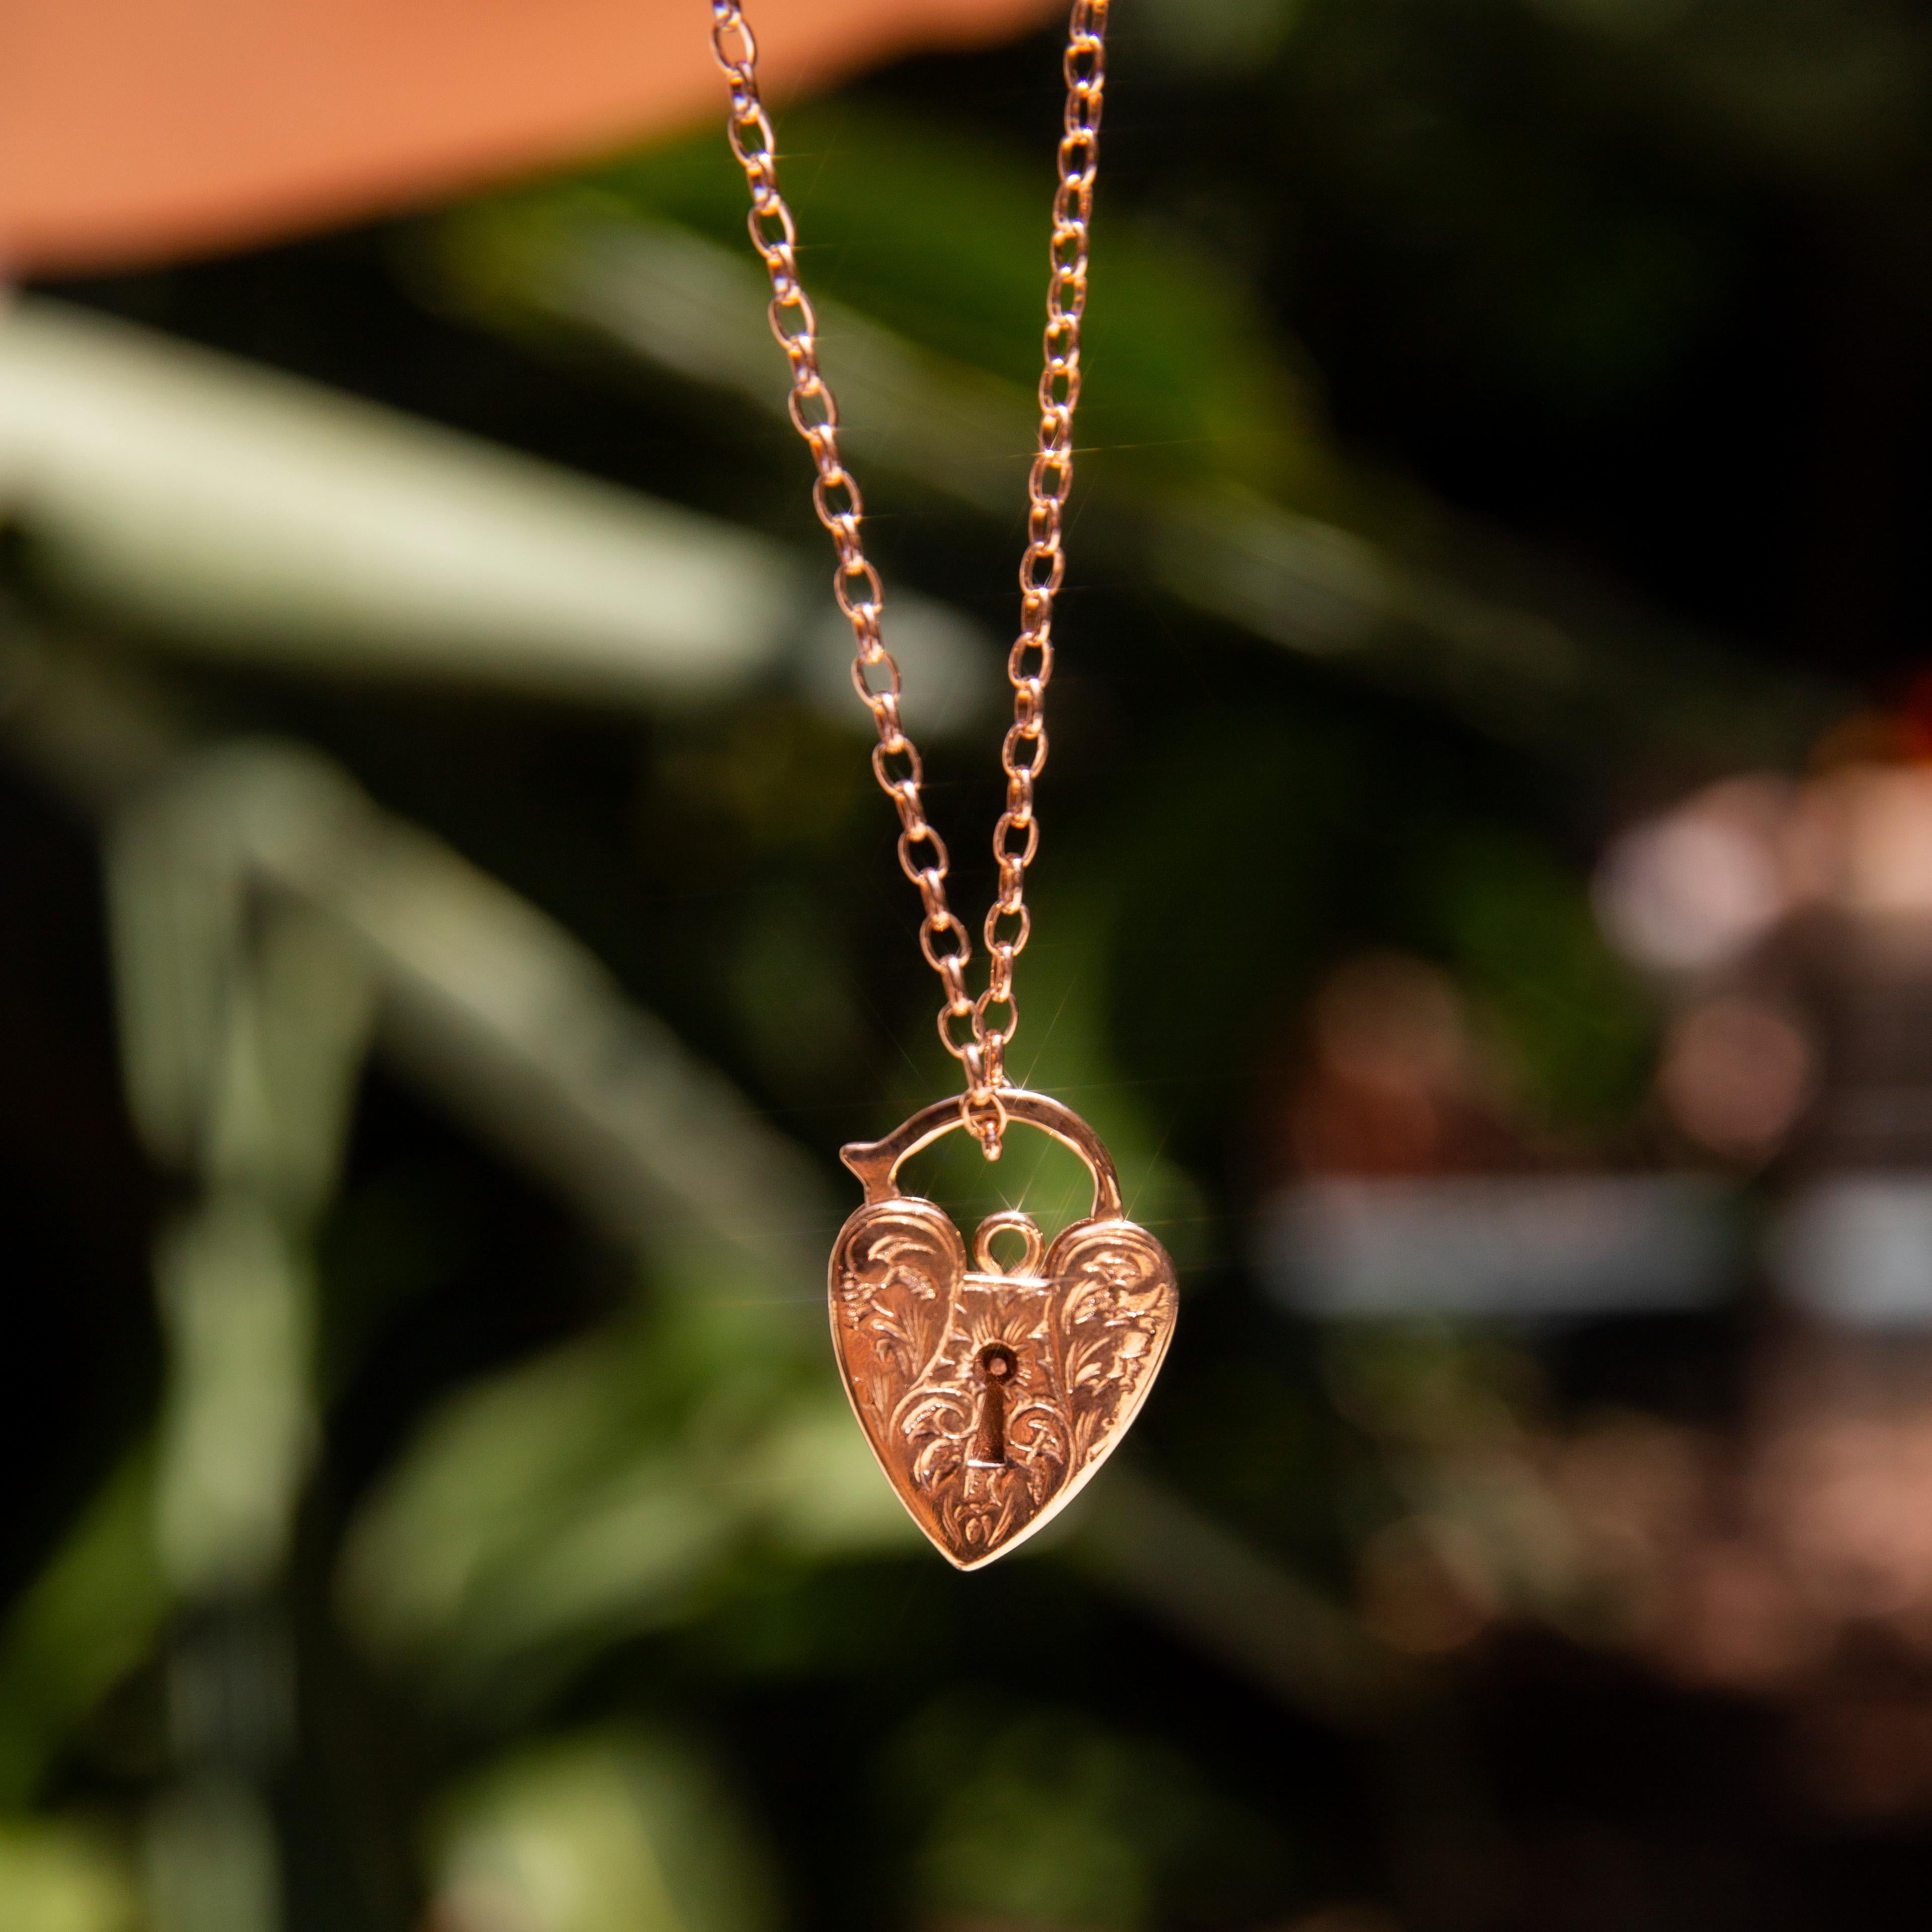 Vintage Circa 1960s Heart Shaped Padlock Pendant & Chain 9 Carat Rose Gold In Good Condition For Sale In Hamilton, AU